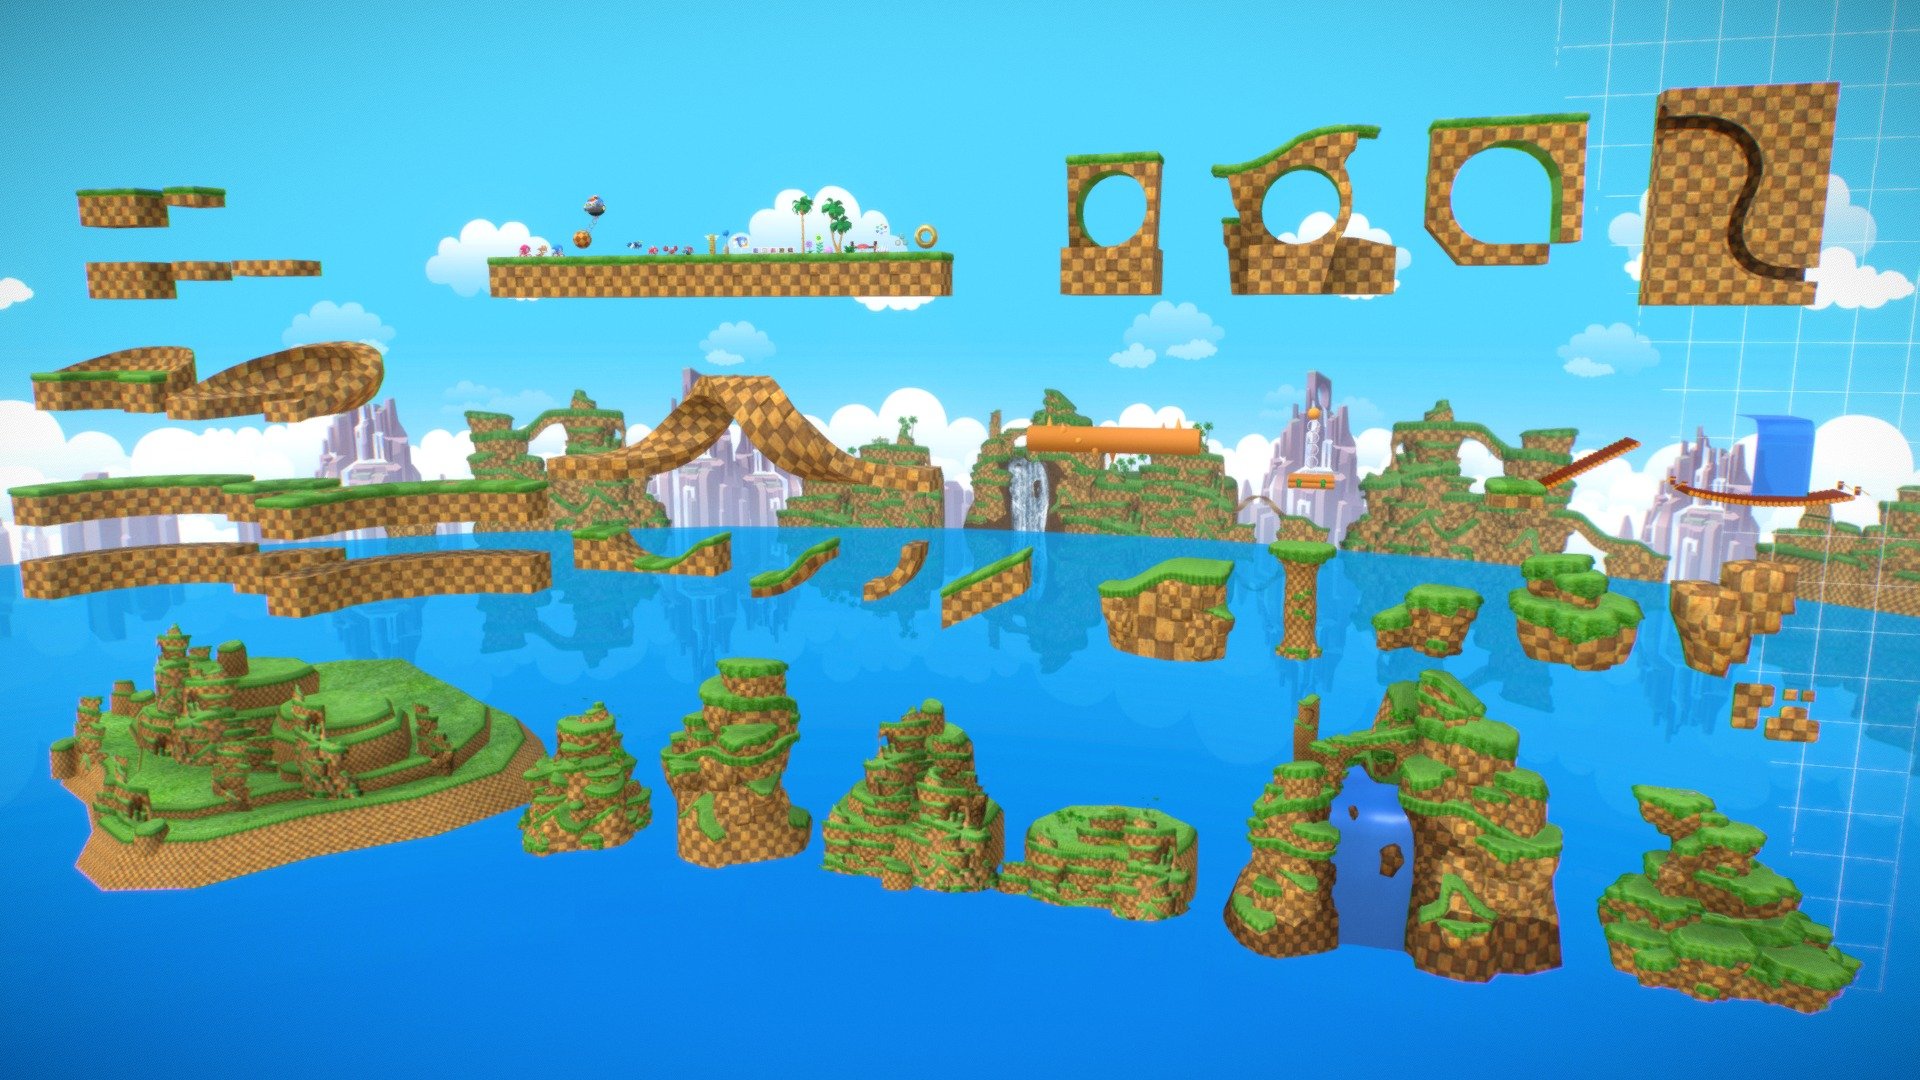 Sonic fan art.
Tileable tracks so you can make your own crazy map fast and easy!
The set also contains many environment assets, like trees, rocks, coins, bonus boxes, enemies and of course the three main characters: Sonic, Knuckles and Tails.

The tracks measurements are 1, 2 3 meters&hellip; so you can combine them perfectly snapping one next to the other.

Since the elements are low poly you can really create long circuits for your project. They are suitable for a platform game, a race game, to preview map ideas&hellip;

UPDATE:
I attached an extra FBX file with 5 new tiles. It can be accesible when you download this model. There are 3 new ramps with different degrees of inclination; So now you have endless posibilities to create! - Sonic - BUILDER - Buy Royalty Free 3D model by Marcos Faci (@marcosfaci) 3d model